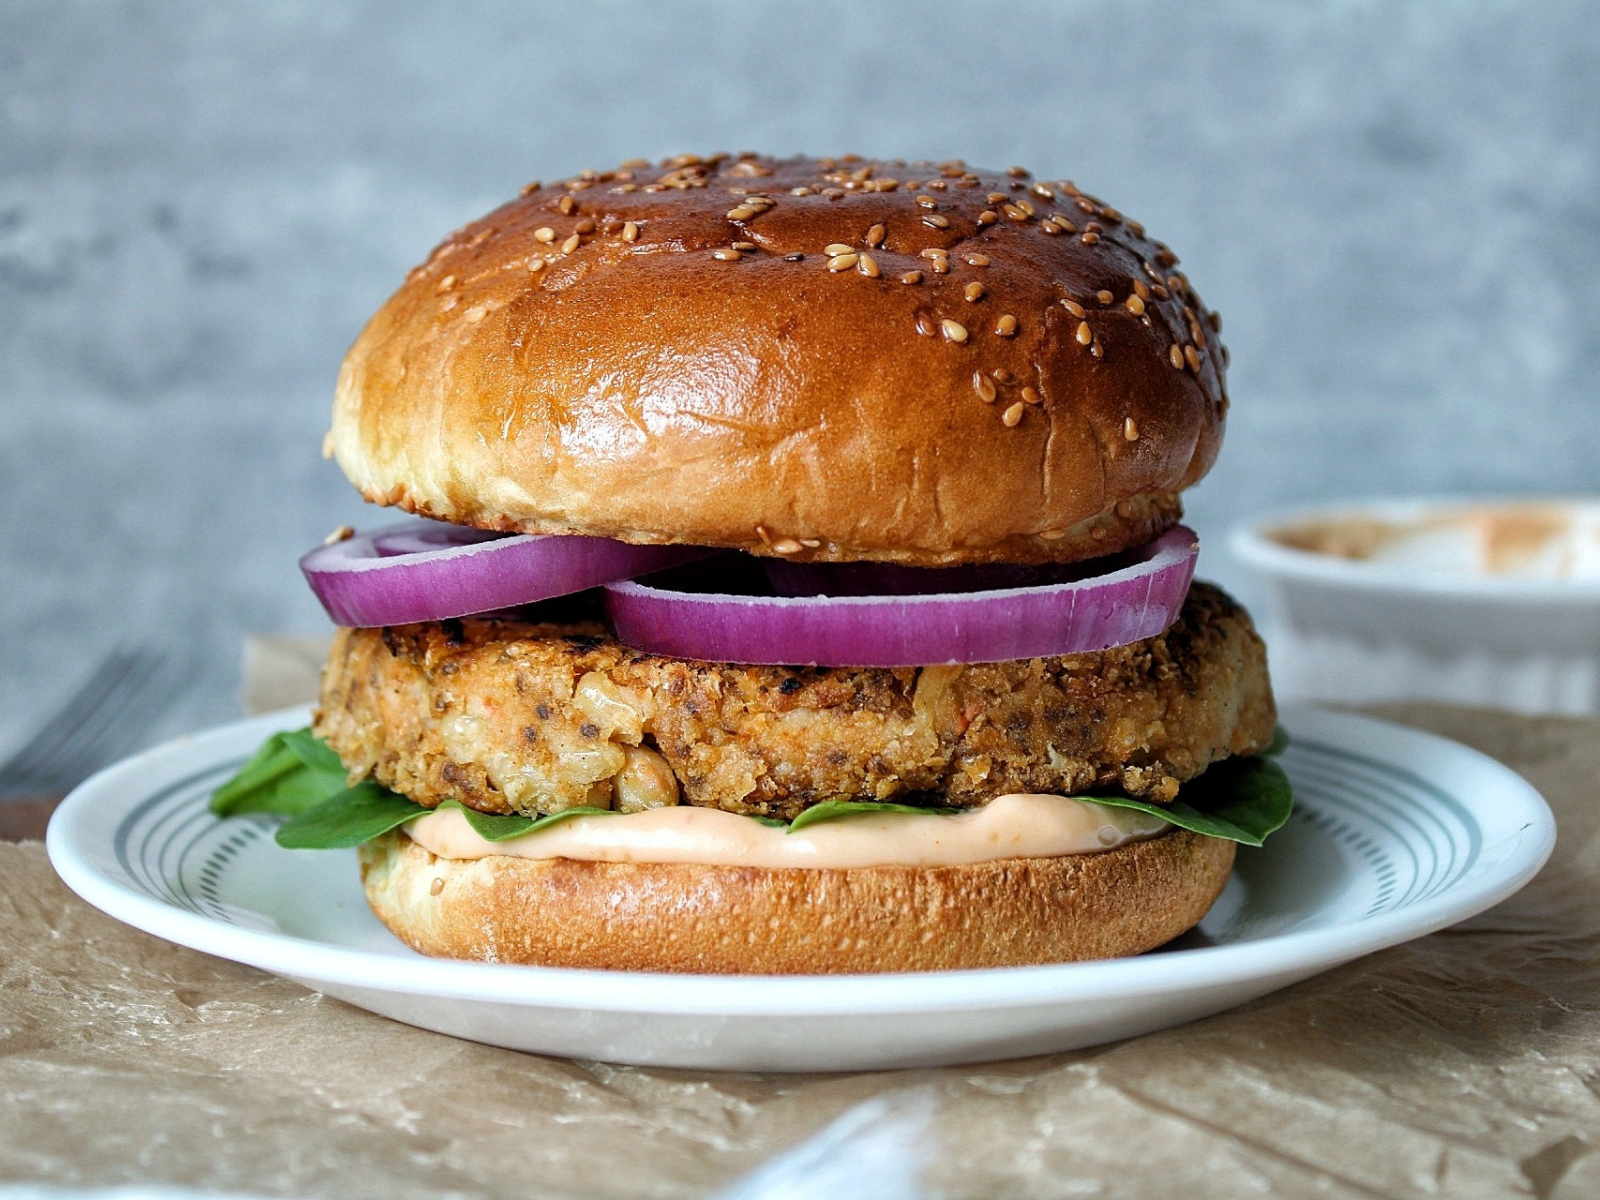 Cannellini bean burger with sirarcha mayo sauce, spinach, and sliced onions.